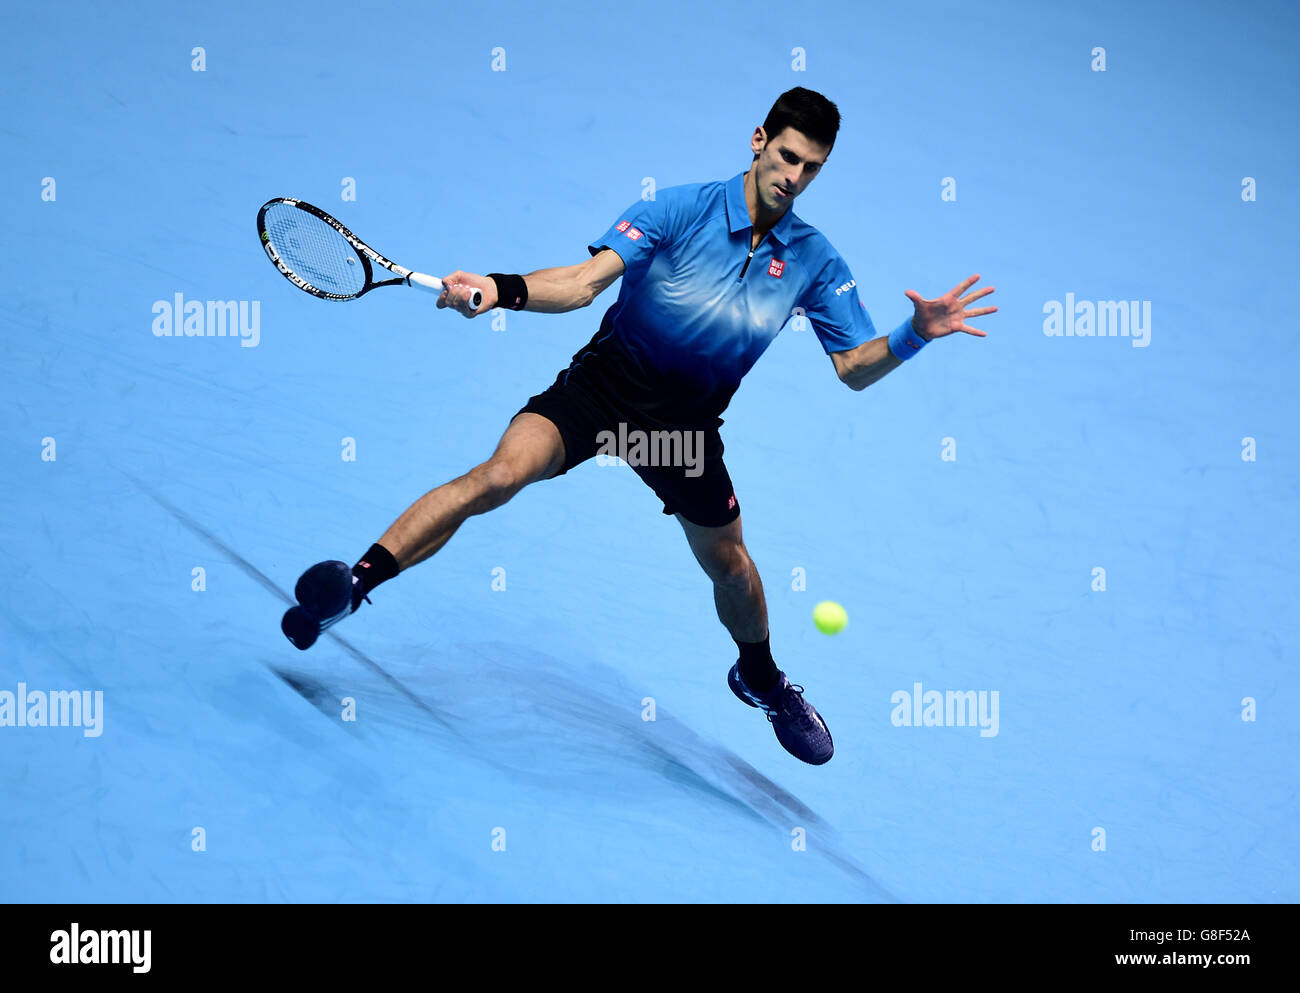 Serbia's Novak Djokovic during the Final of the ATP World Tour Finals at the O2 Arena, London. PRESS ASSSOCIATION Photo. Picture date: Sunday November 22, 2015. See PA story TENNIS London. Photo credit should read: Adam Davy/PA Wire. Stock Photo